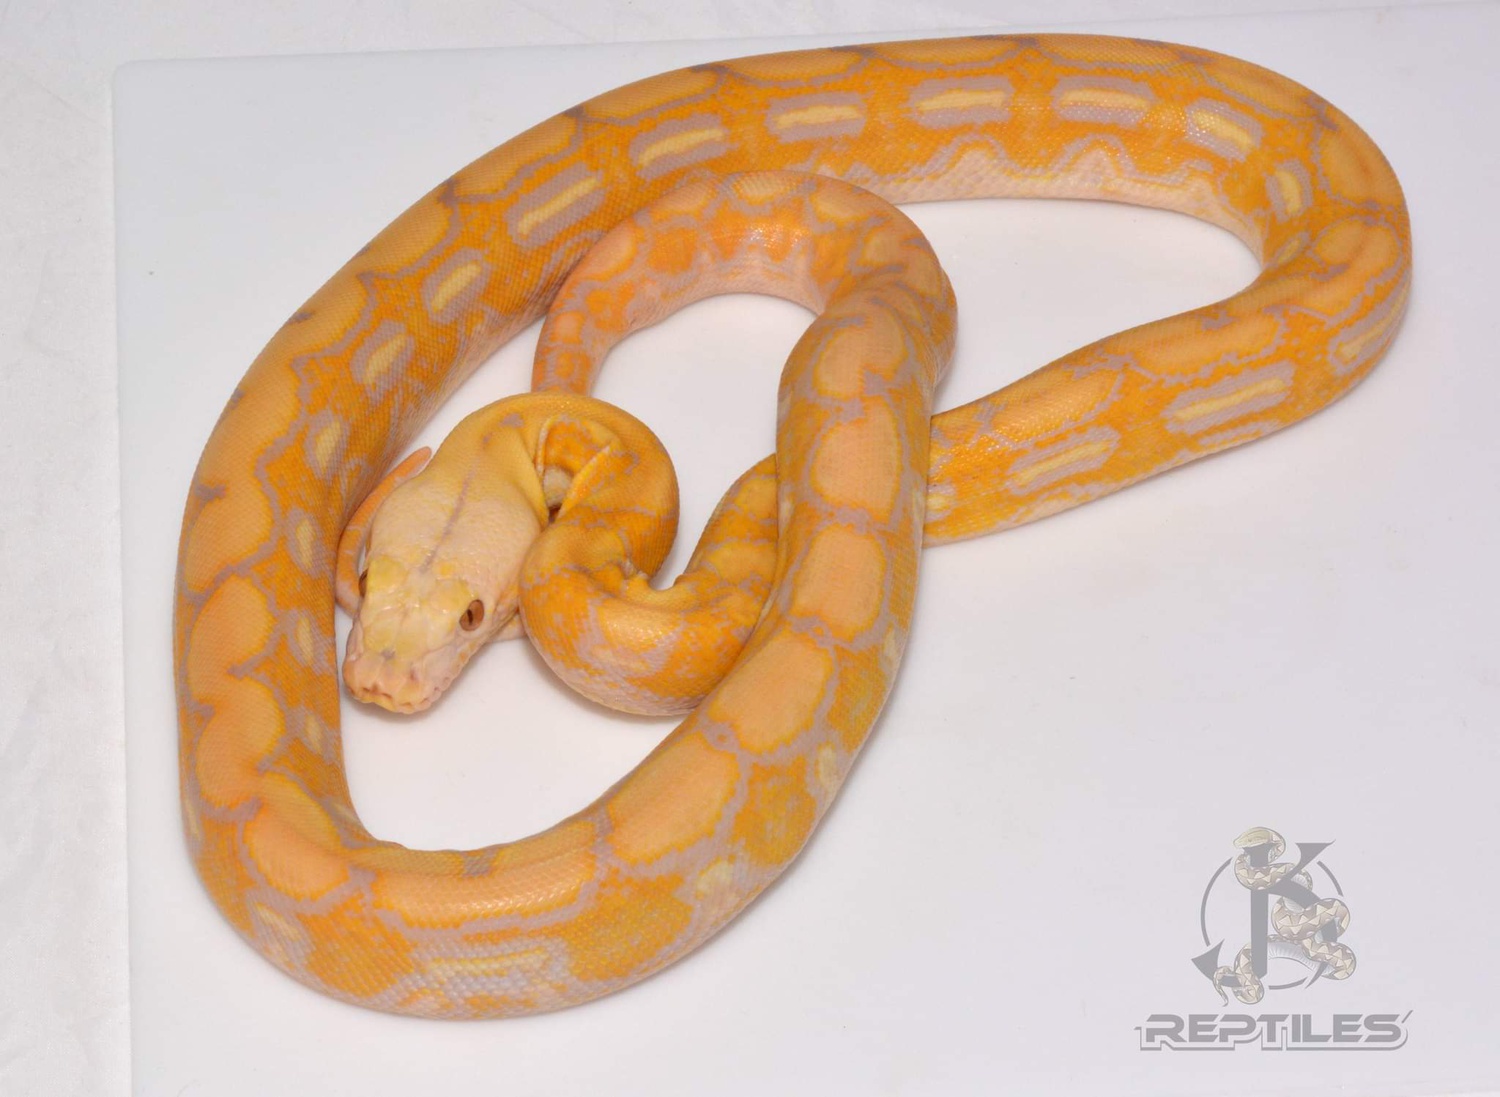 Blonde Tiger 66% Poss Het Anthrax Reticulated Python by JK Reptiles